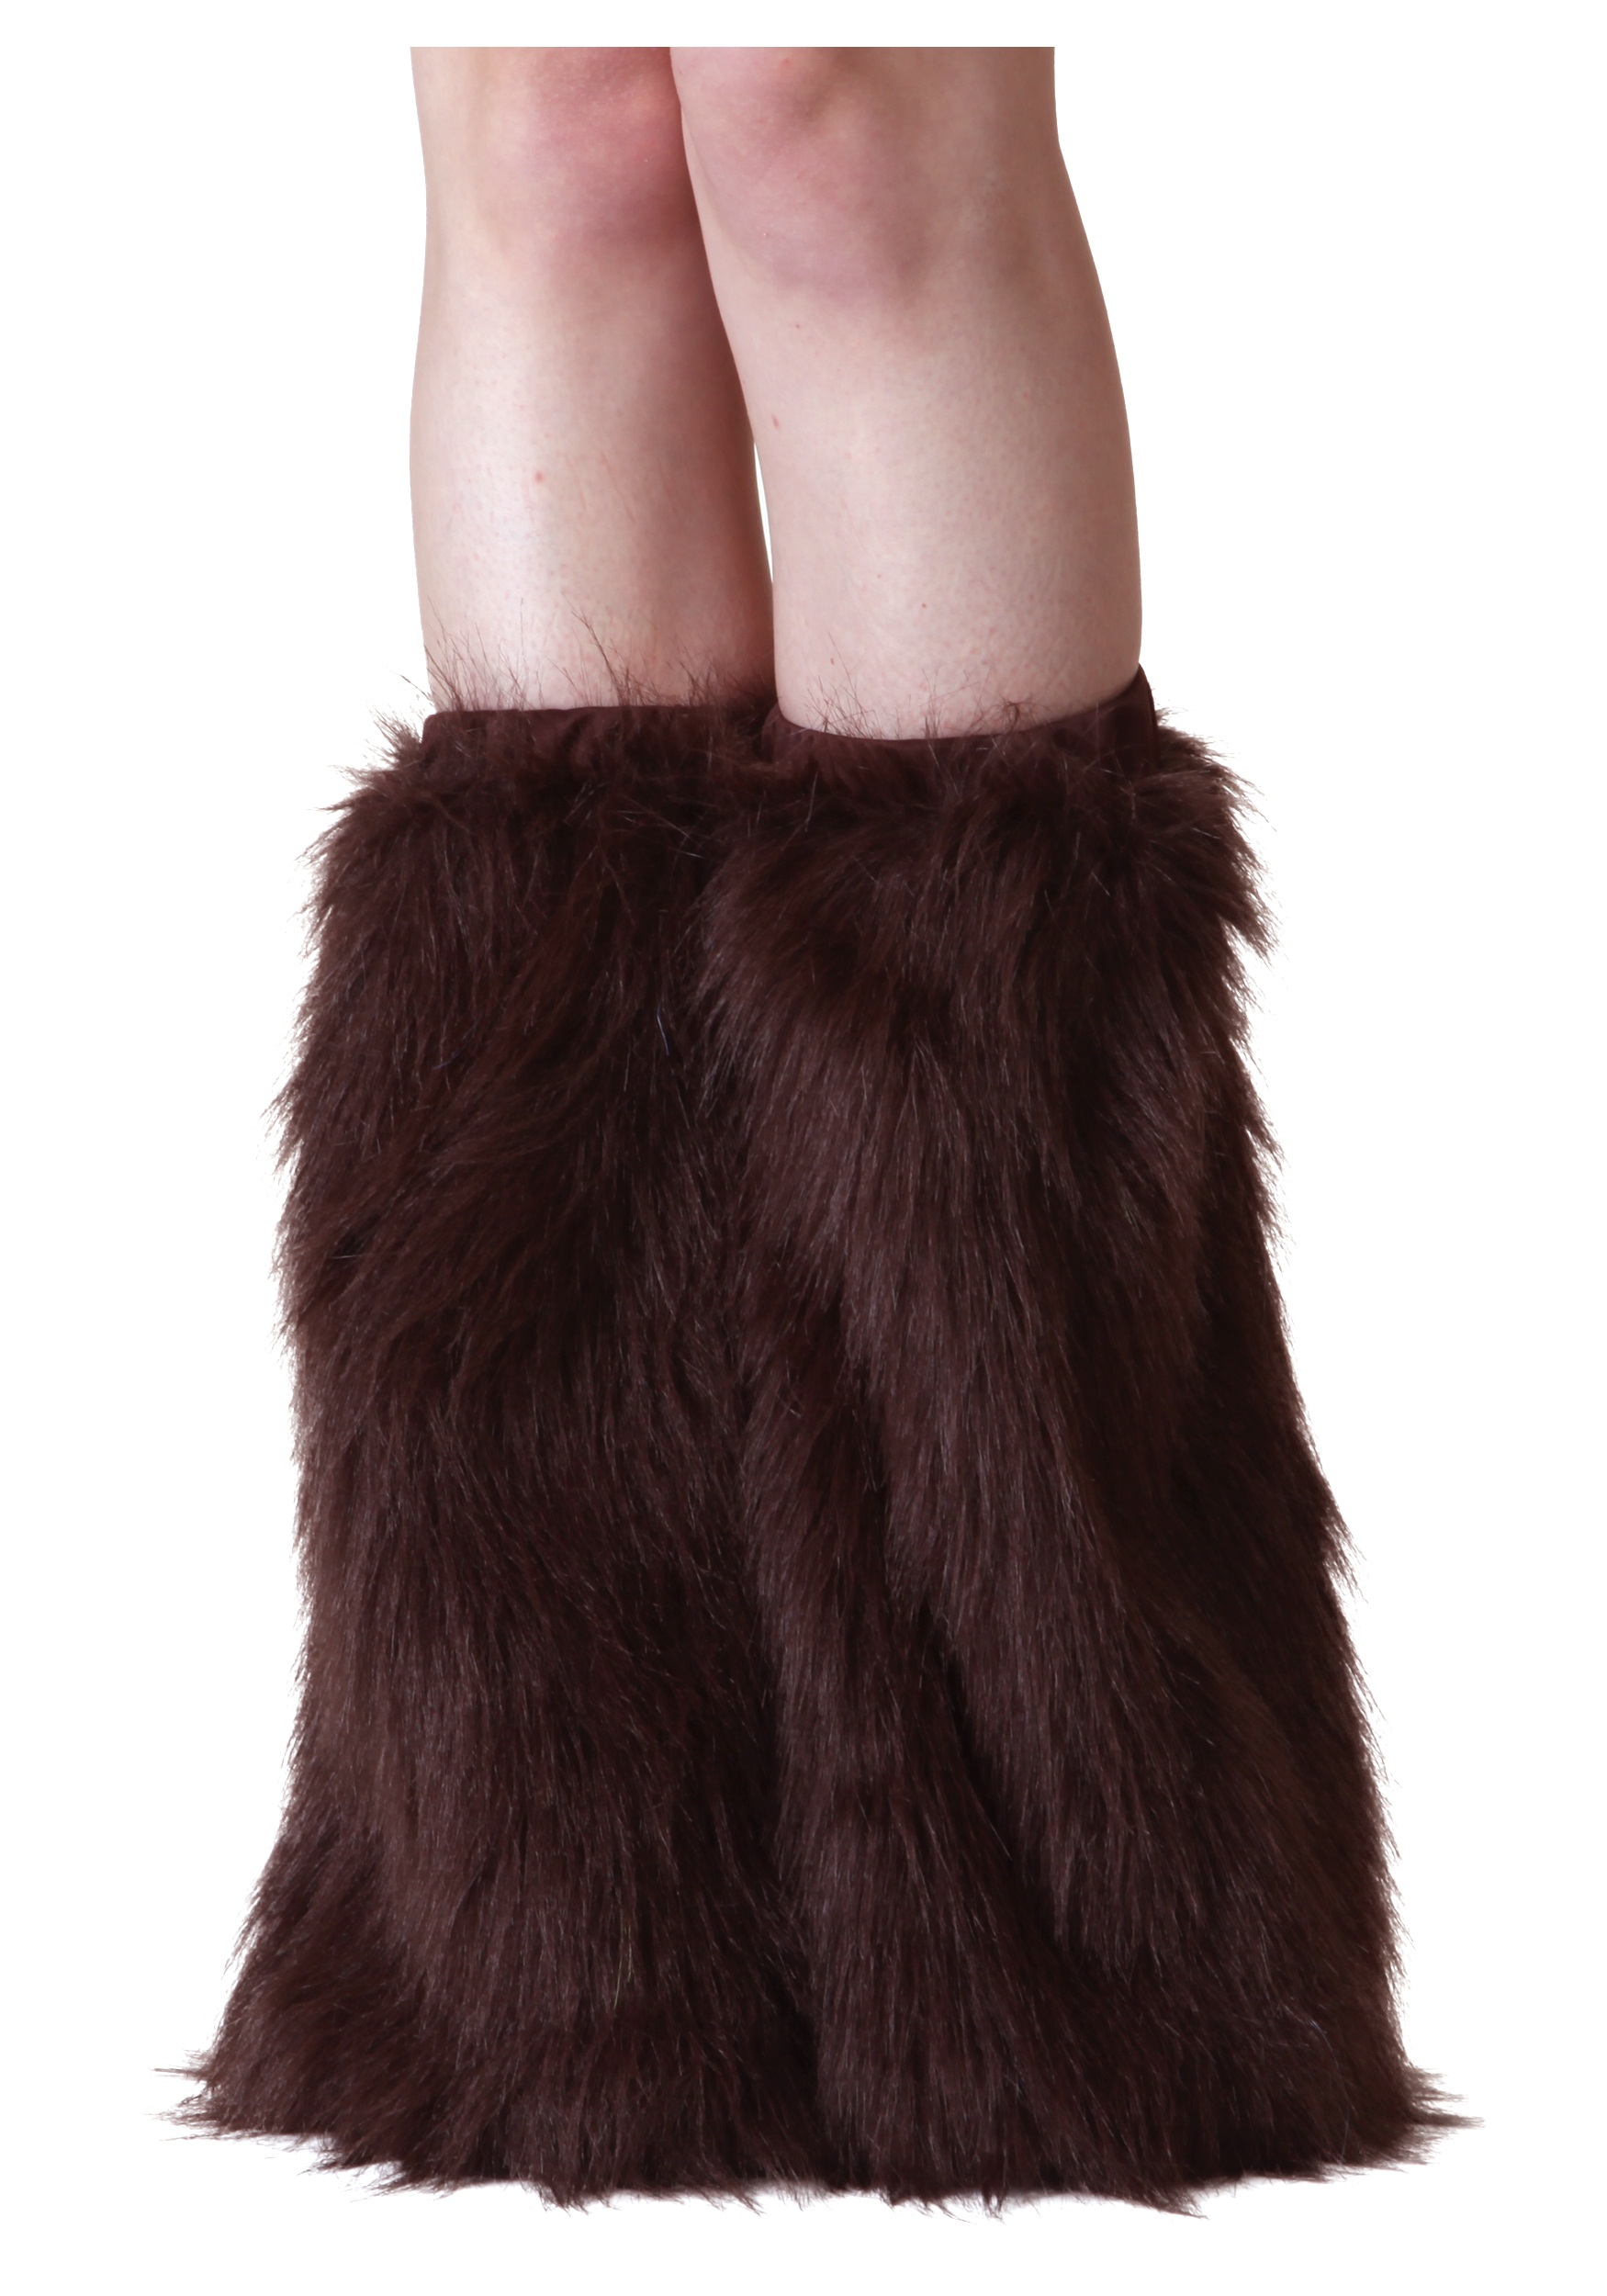 faux fur leg warmers boot covers